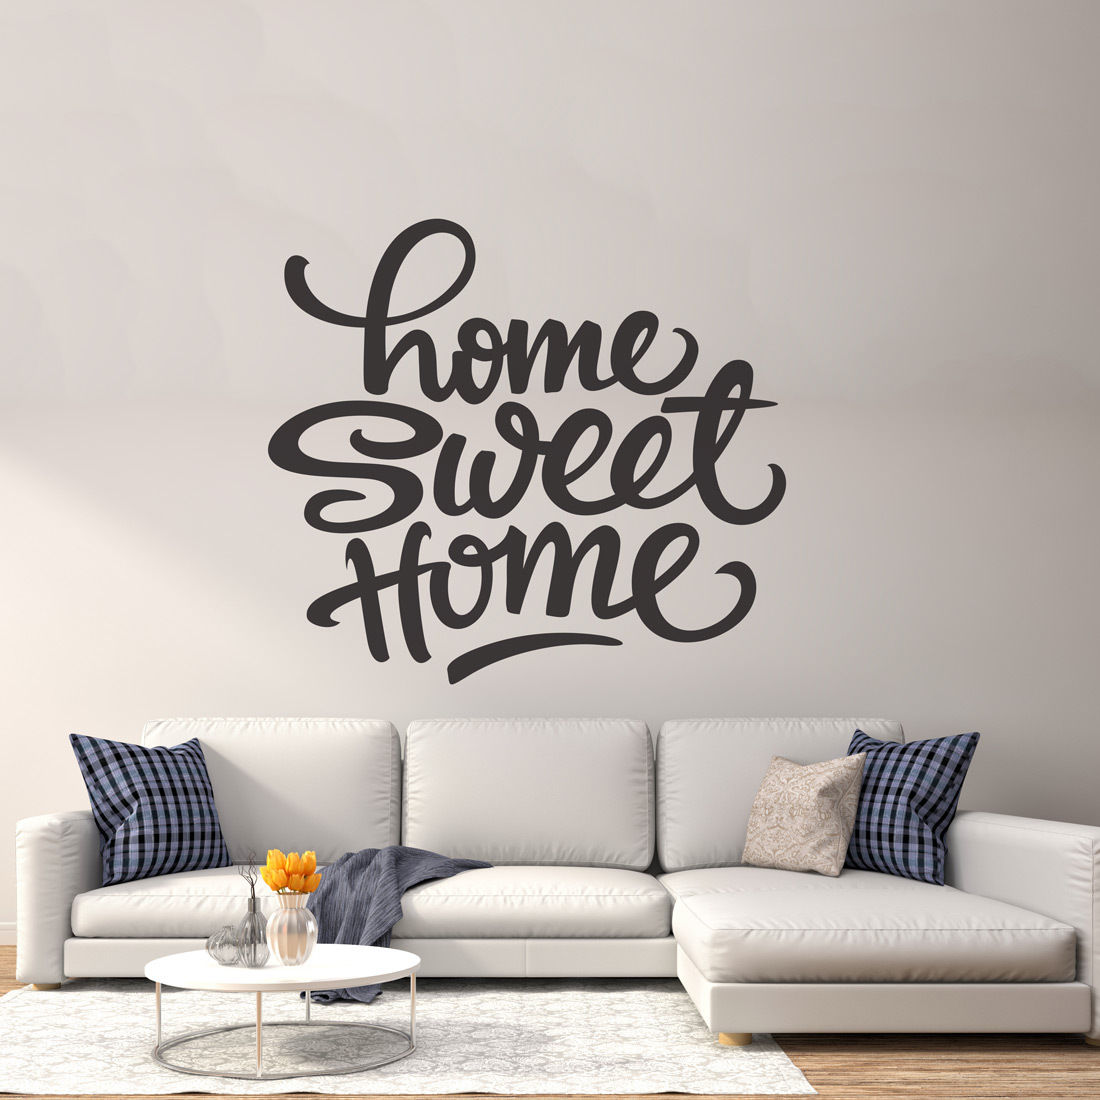 A More Beautiful And Fun Living Room With Wall Stickers